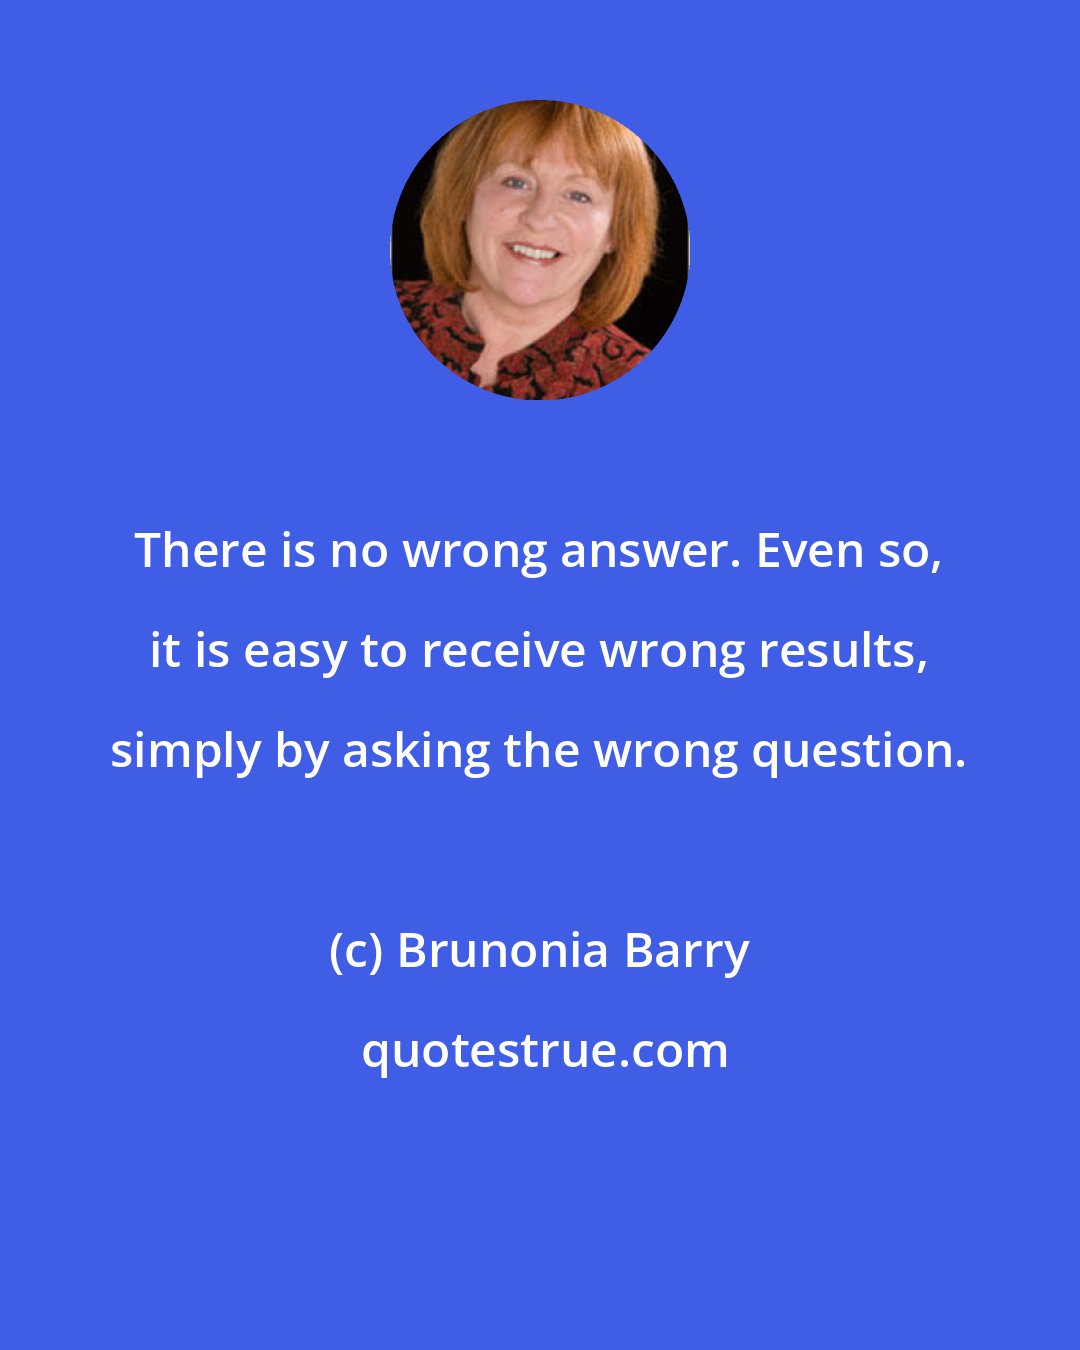 Brunonia Barry: There is no wrong answer. Even so, it is easy to receive wrong results, simply by asking the wrong question.